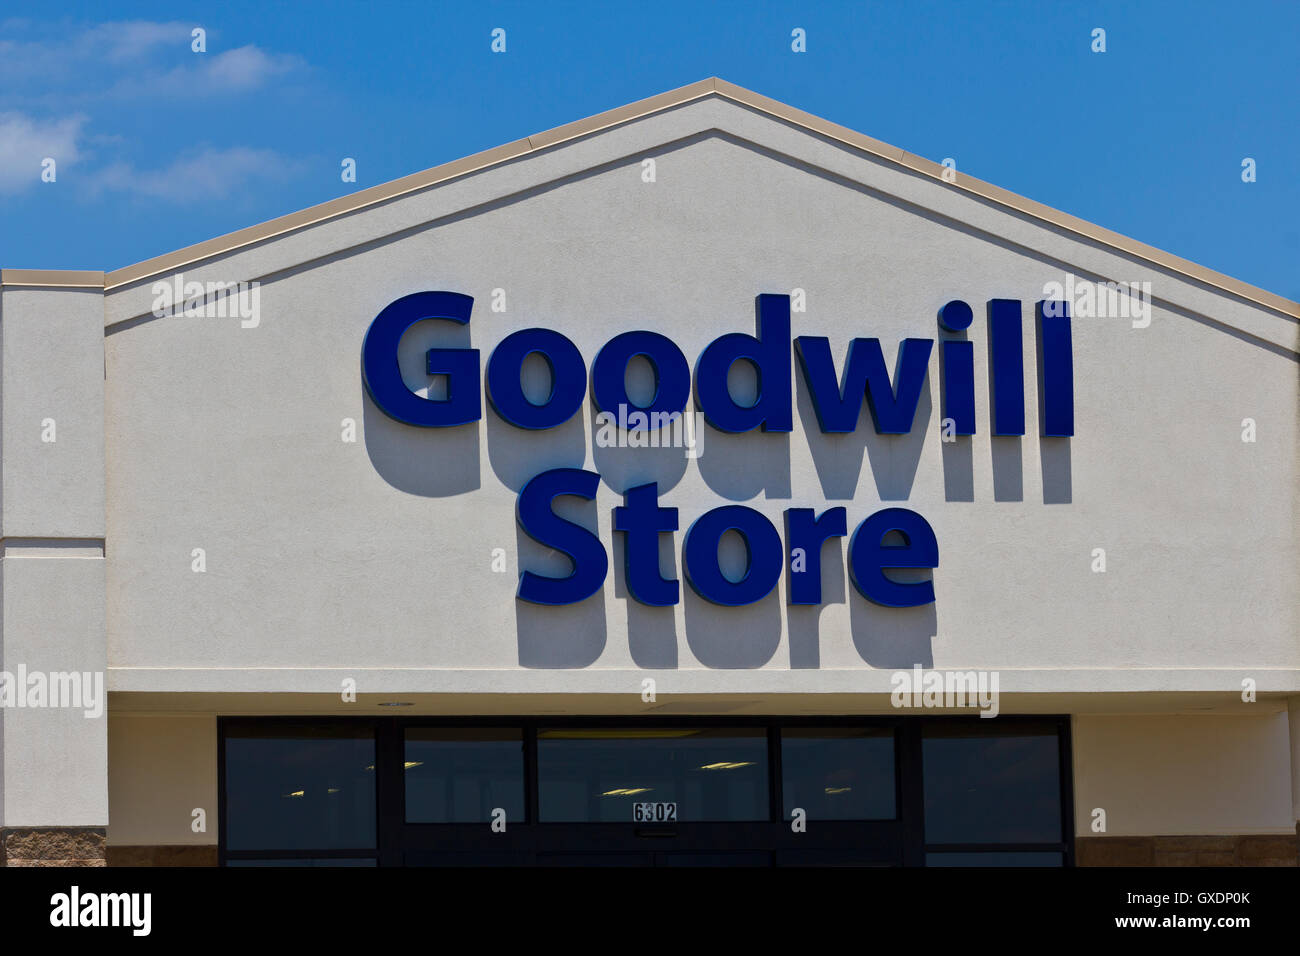 Indianapolis - Circa June 2016: A Goodwill Store. In 2015, Goodwill helped more than 26.4 million people train for careers I Stock Photo